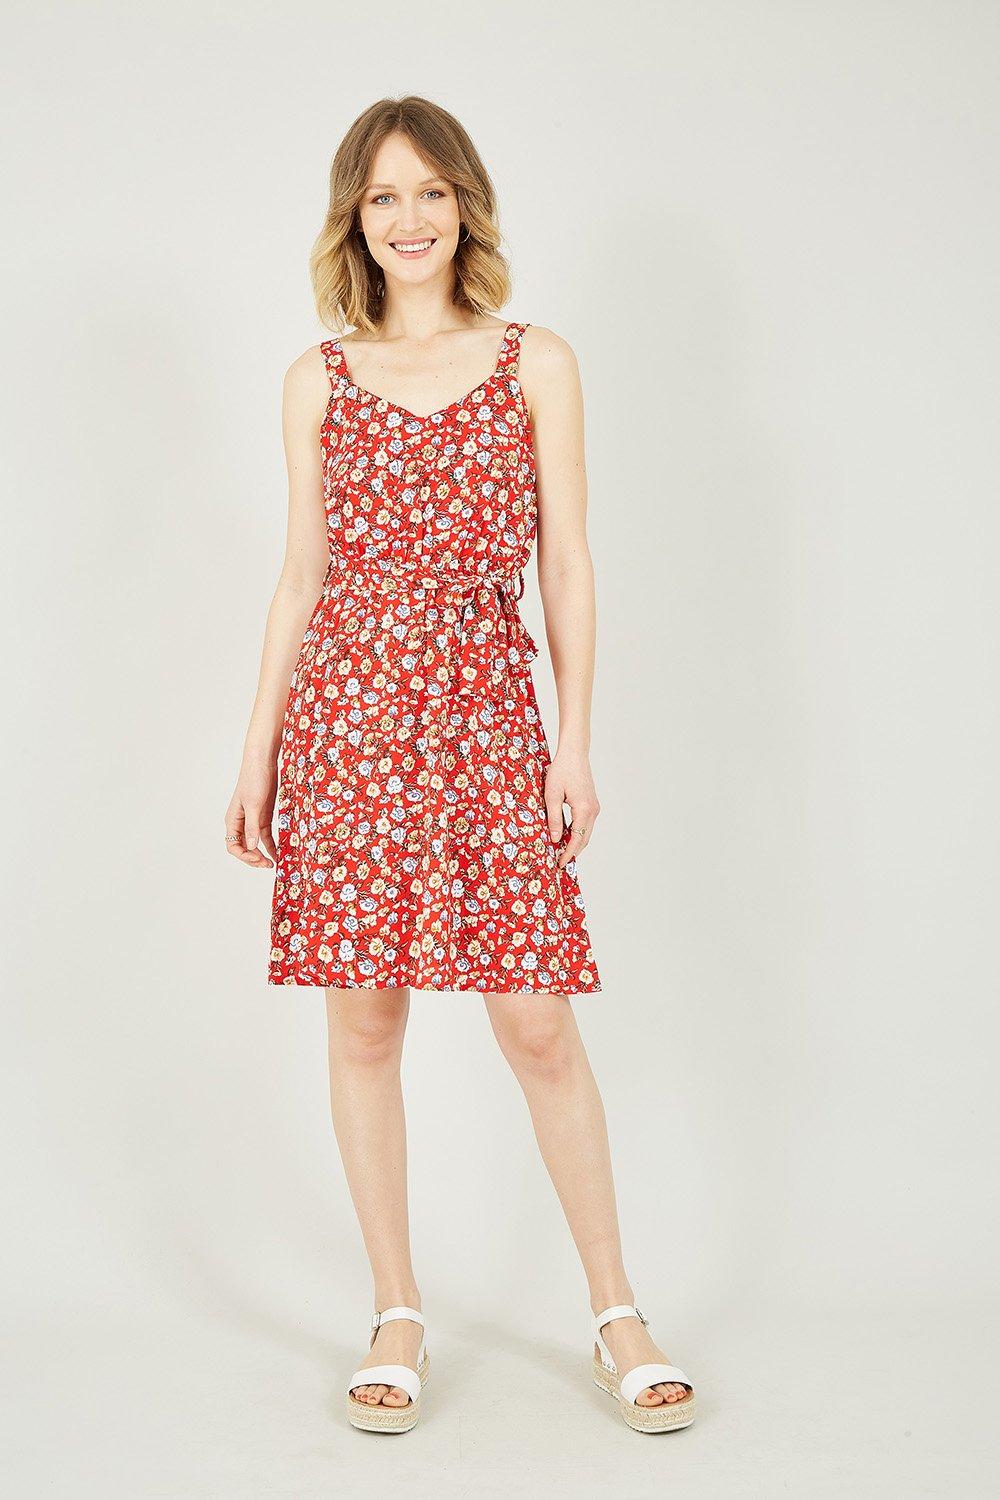 Red Floral Ditsy Dress